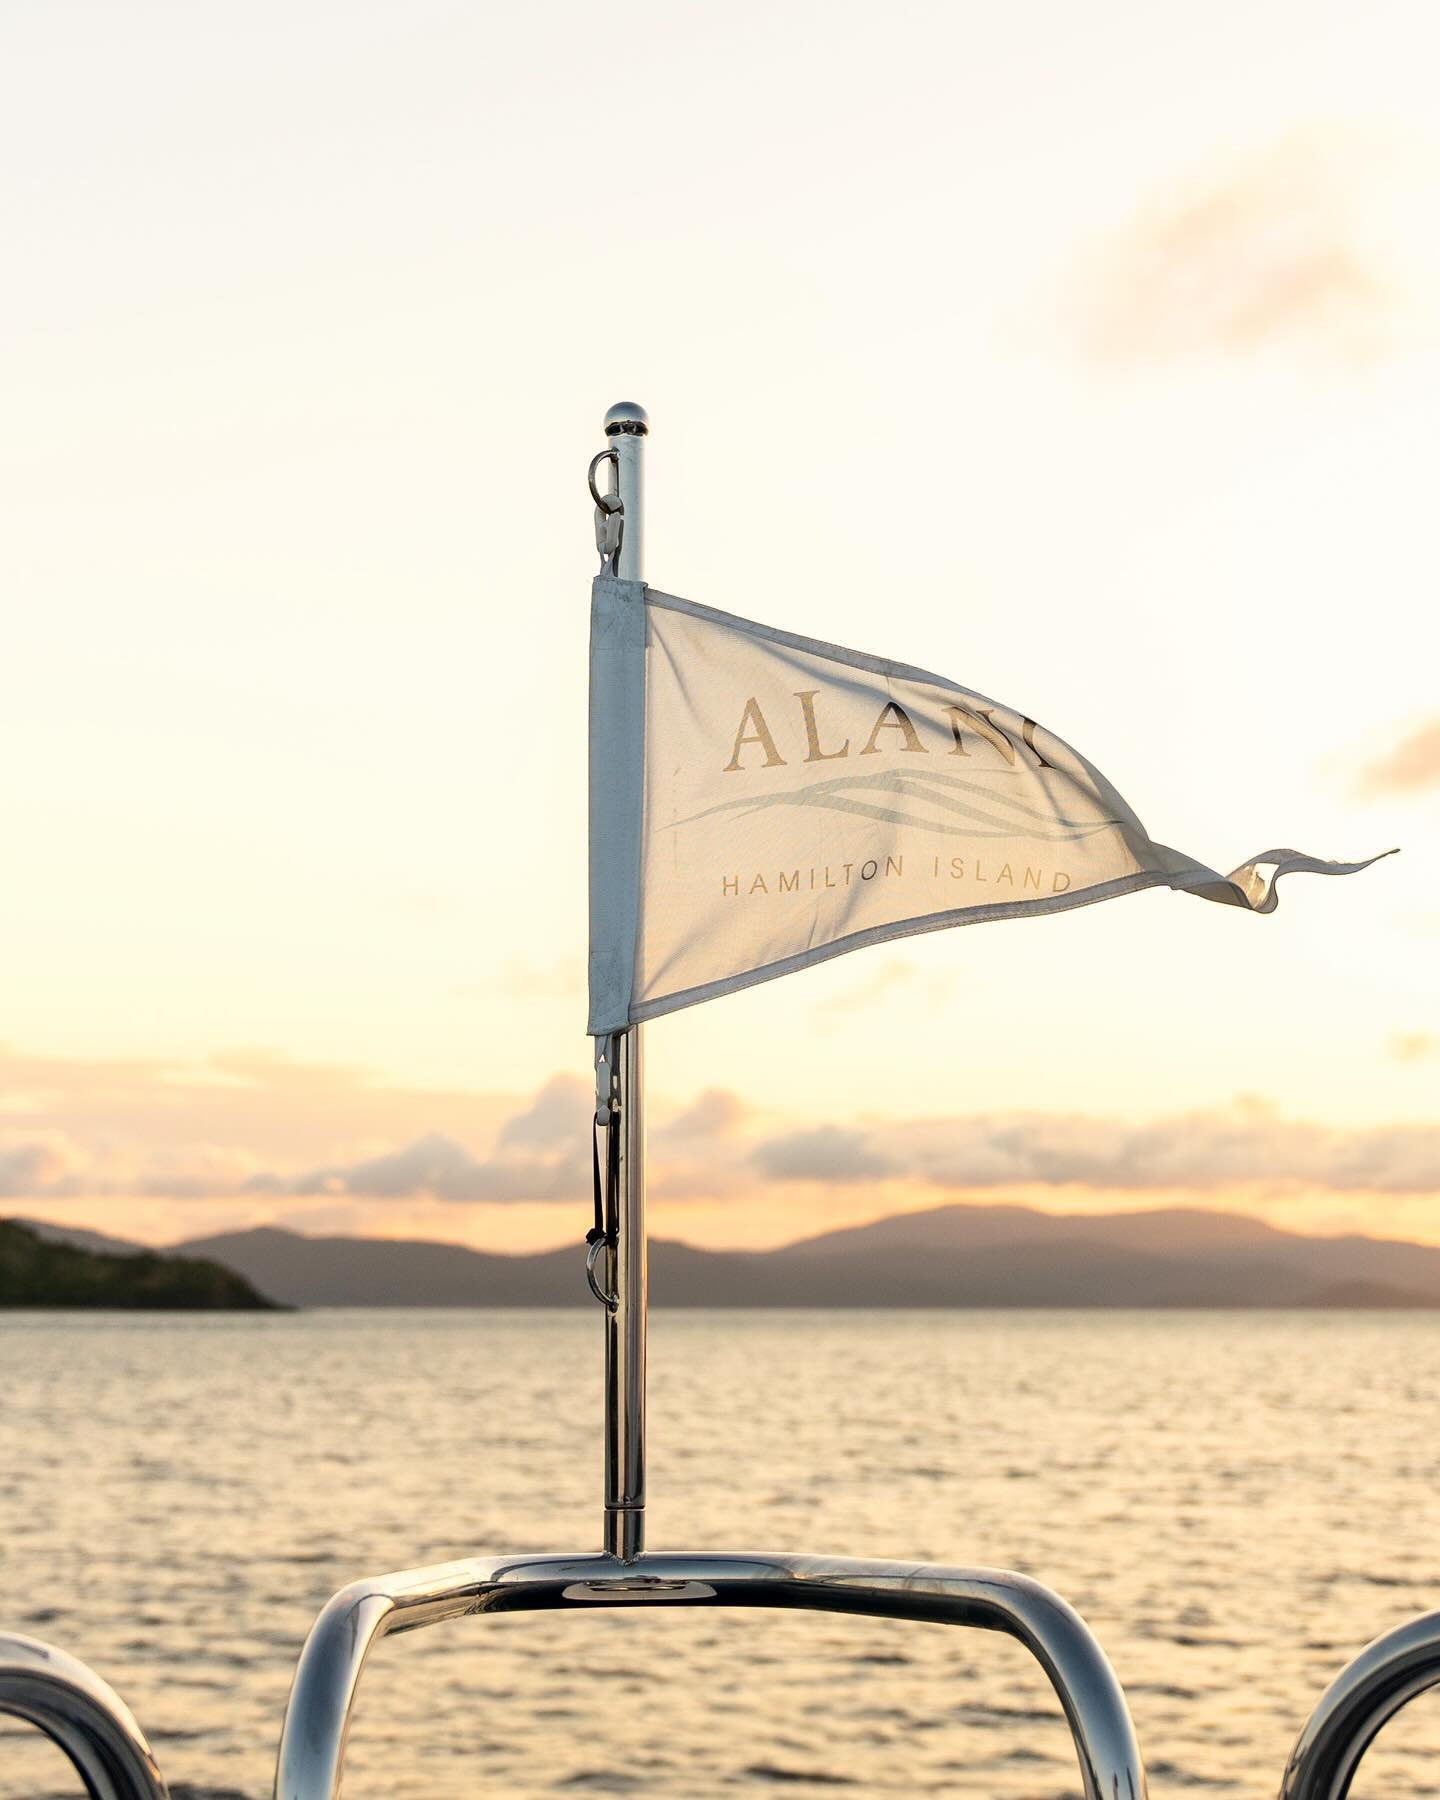 @alaniexperience accommodation on Hamilton Island provides unparalleled luxury both on land and water. With options like on land houses Cowries and Jasmine, or the M/Y ALANI yacht, guests can enjoy impeccable interior finishes and breathtaking views.